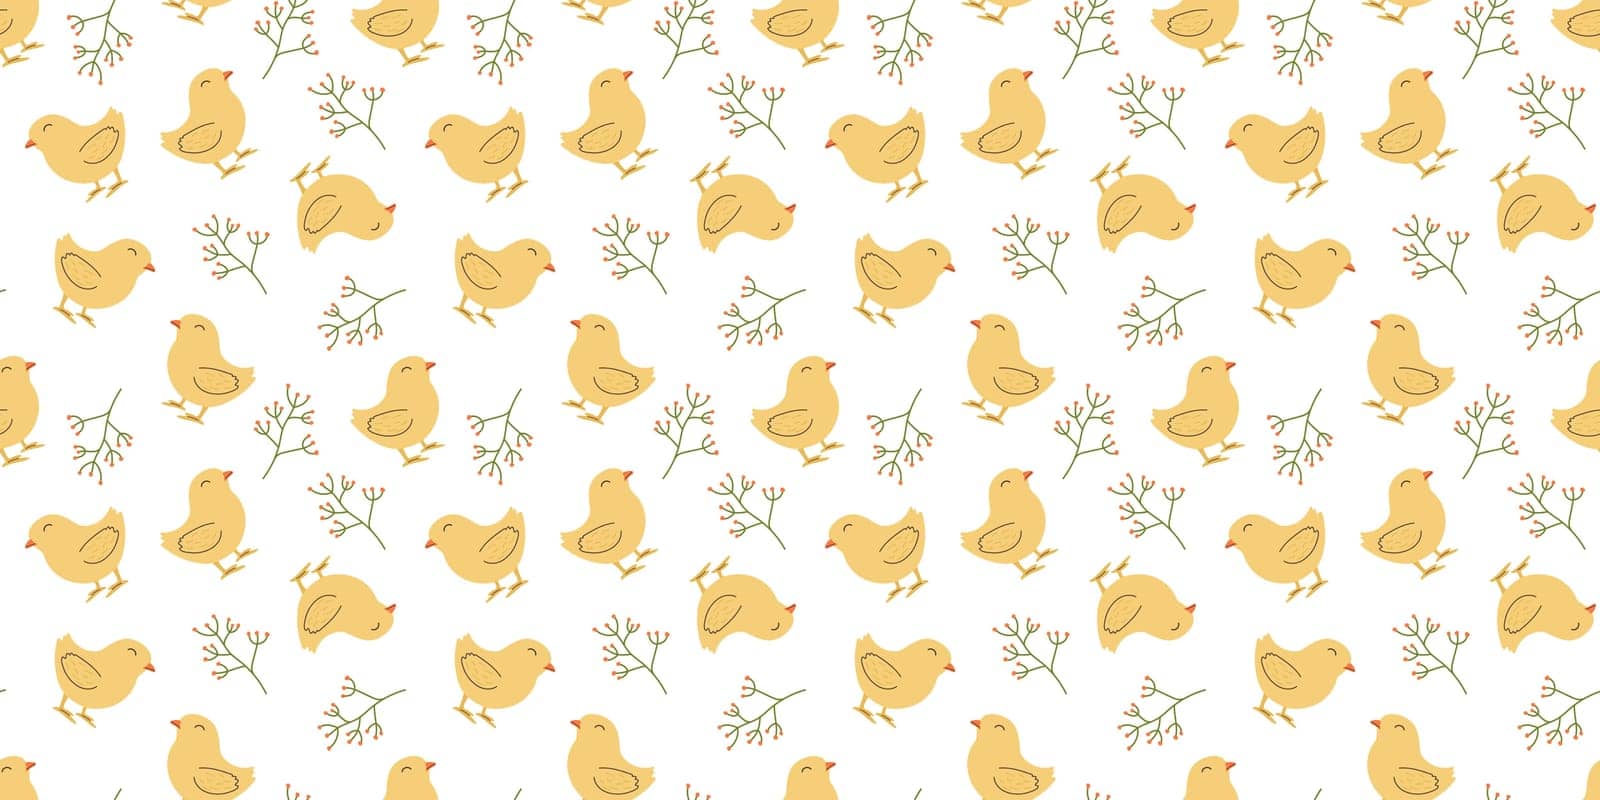 Seamless pattern with Chicken and flowers. Easter design for wrapping paper and backgrounds. Hand drawn illustration of Chick bird in kawaii style.